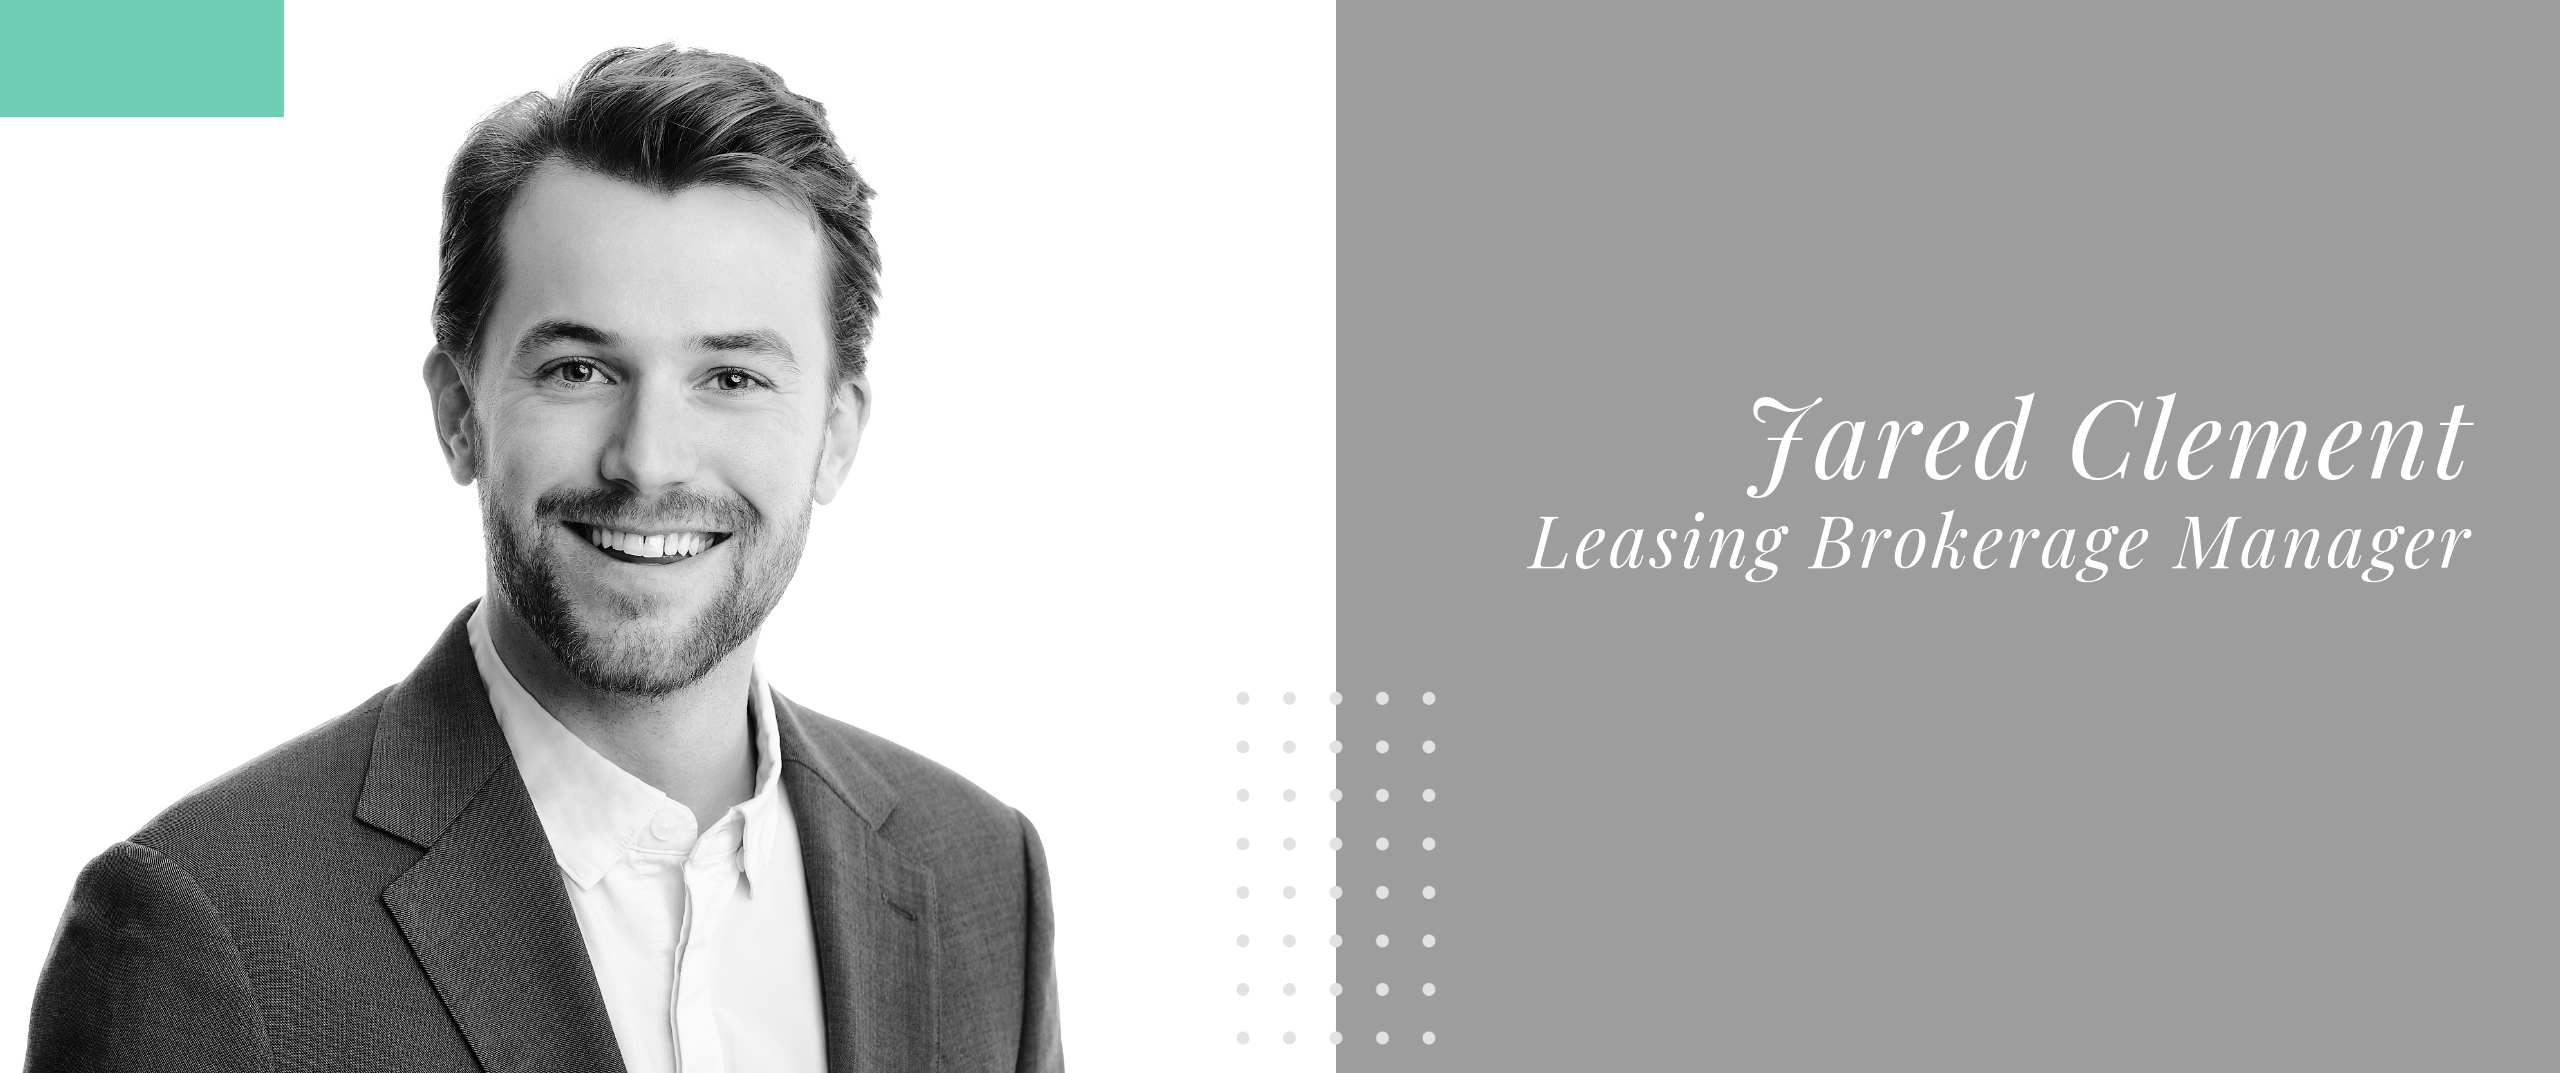 Jared Clement Promoted to Newly-Created Leasing Brokerage Manager Role